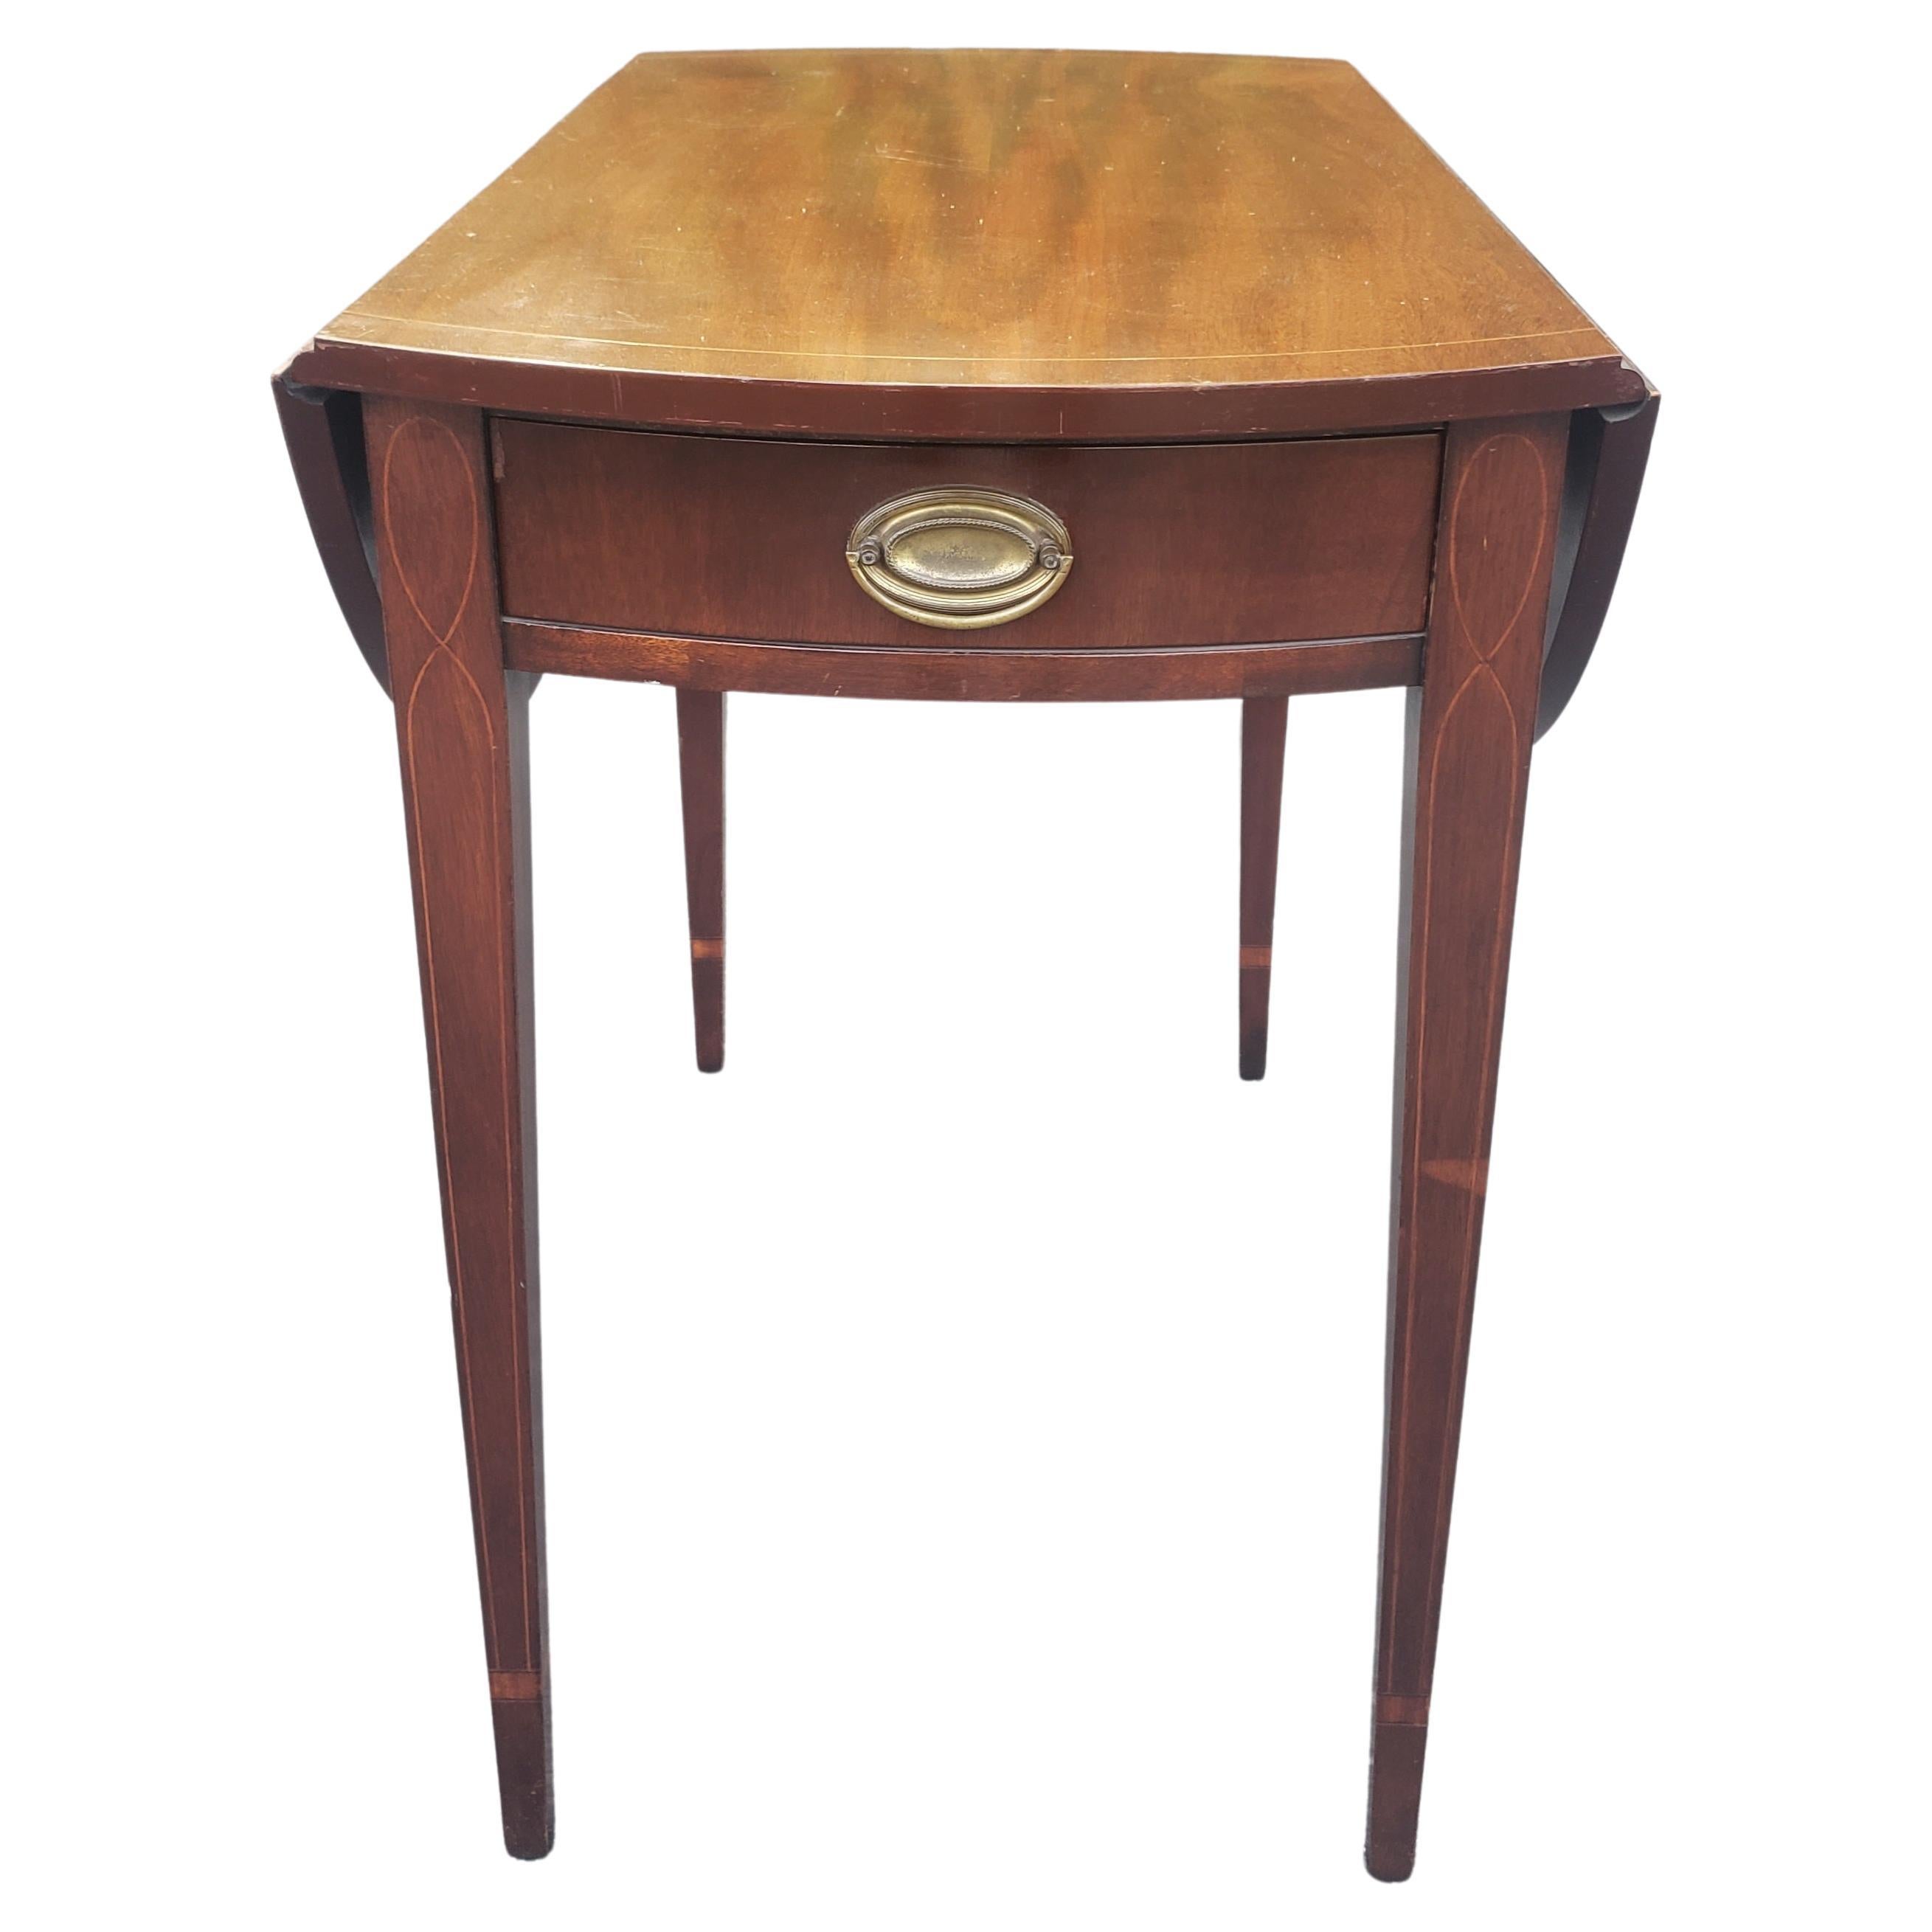 1940s Federal Mahohany and Satinwood Inlaid Pembroke Side Table. Measures 18.5